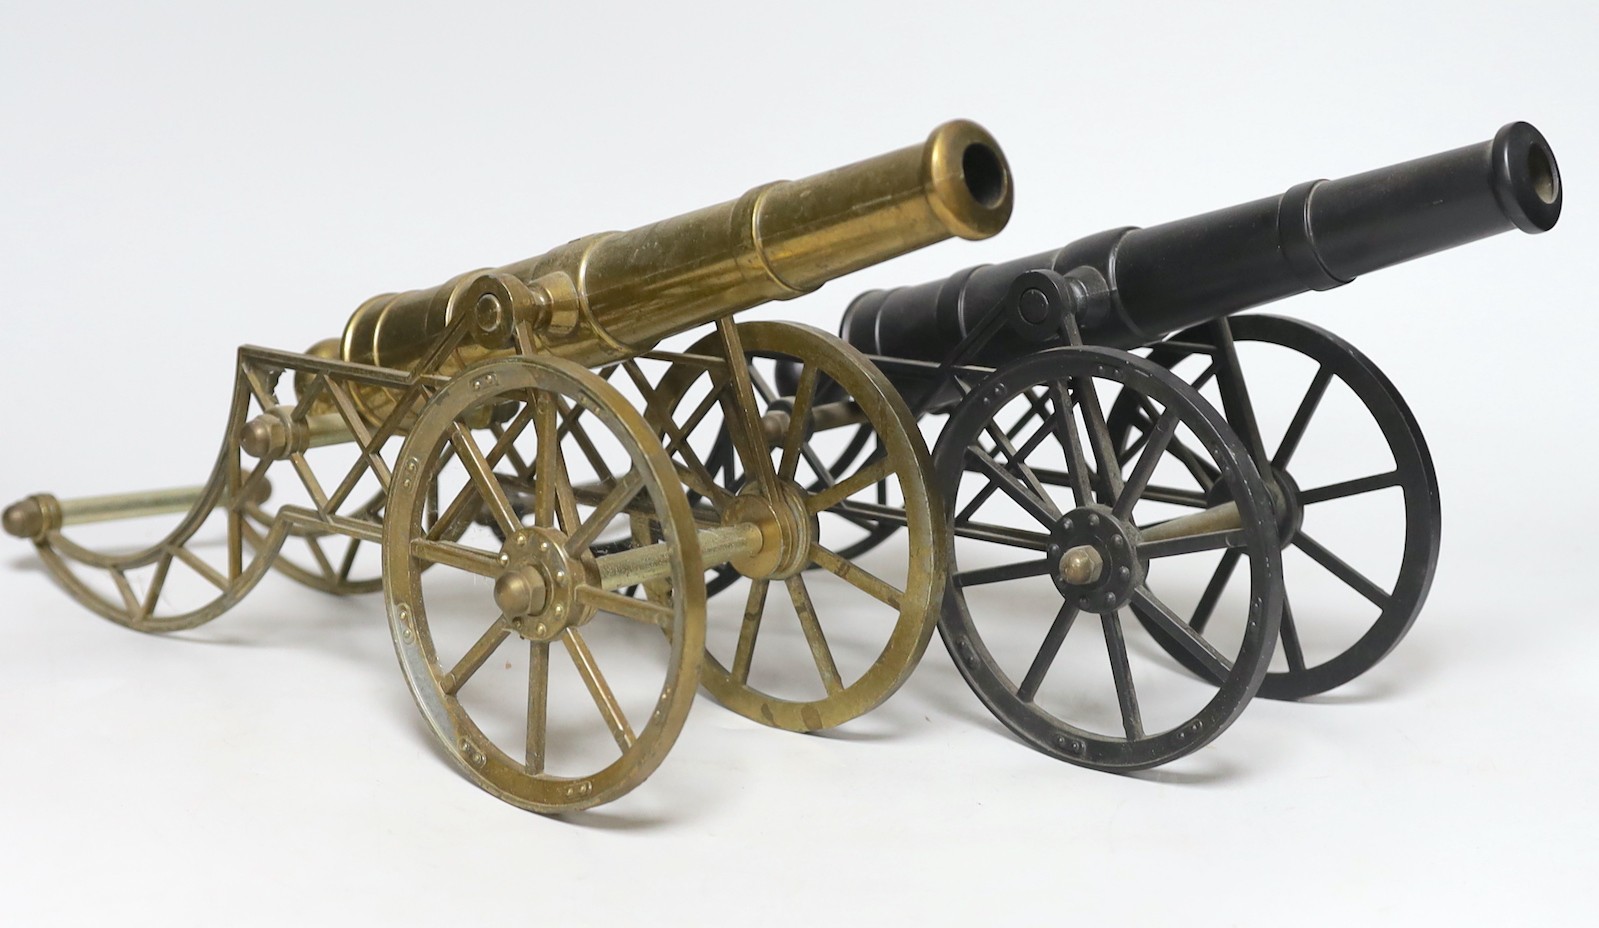 Two models of cannons, stamped G.A.A.D., 40cm long